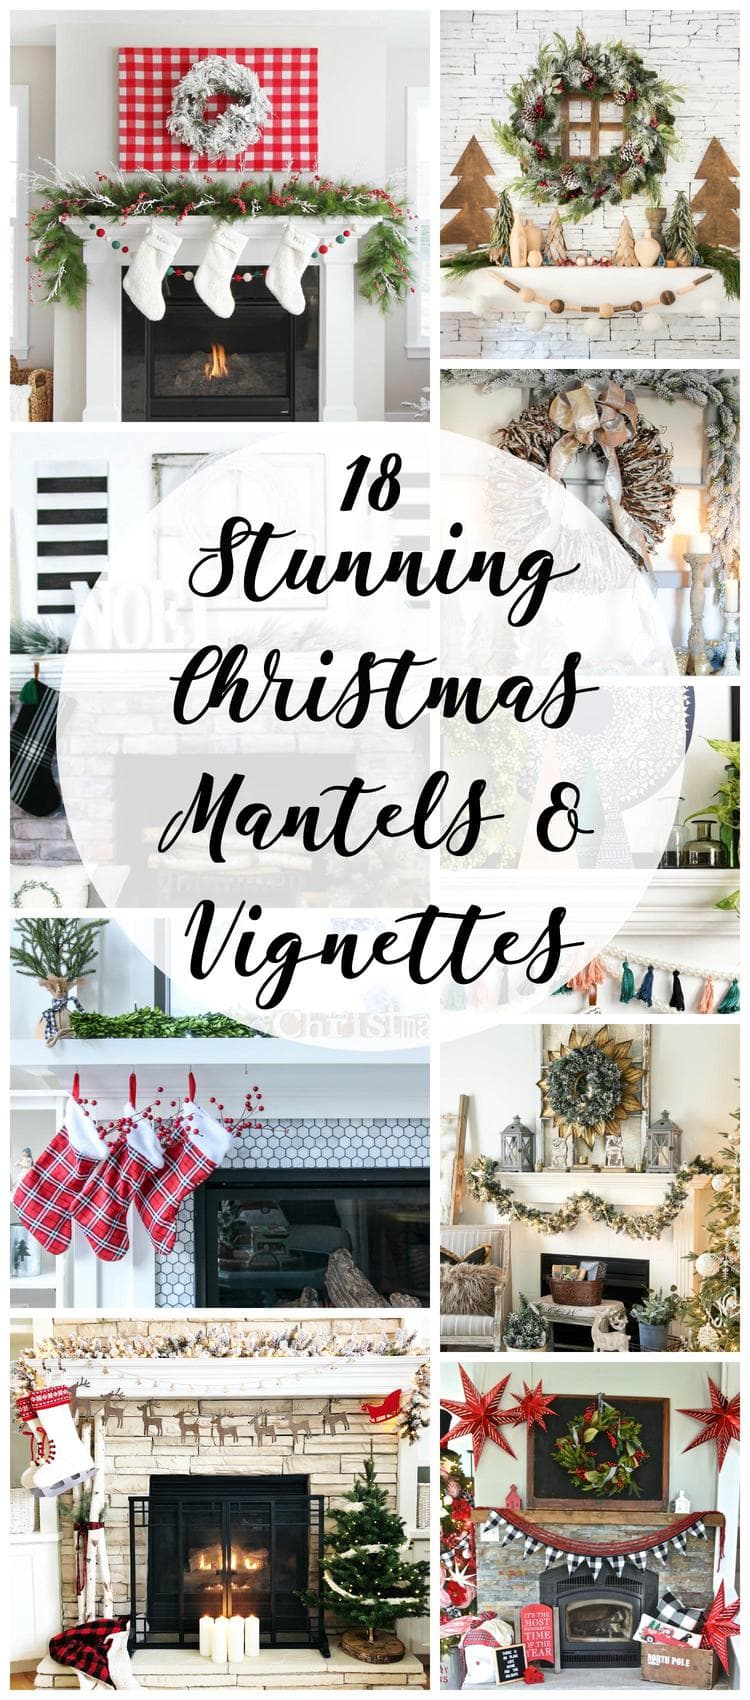 18 Stunning Christmas mantel ideas, Christmas mantels of every size and style